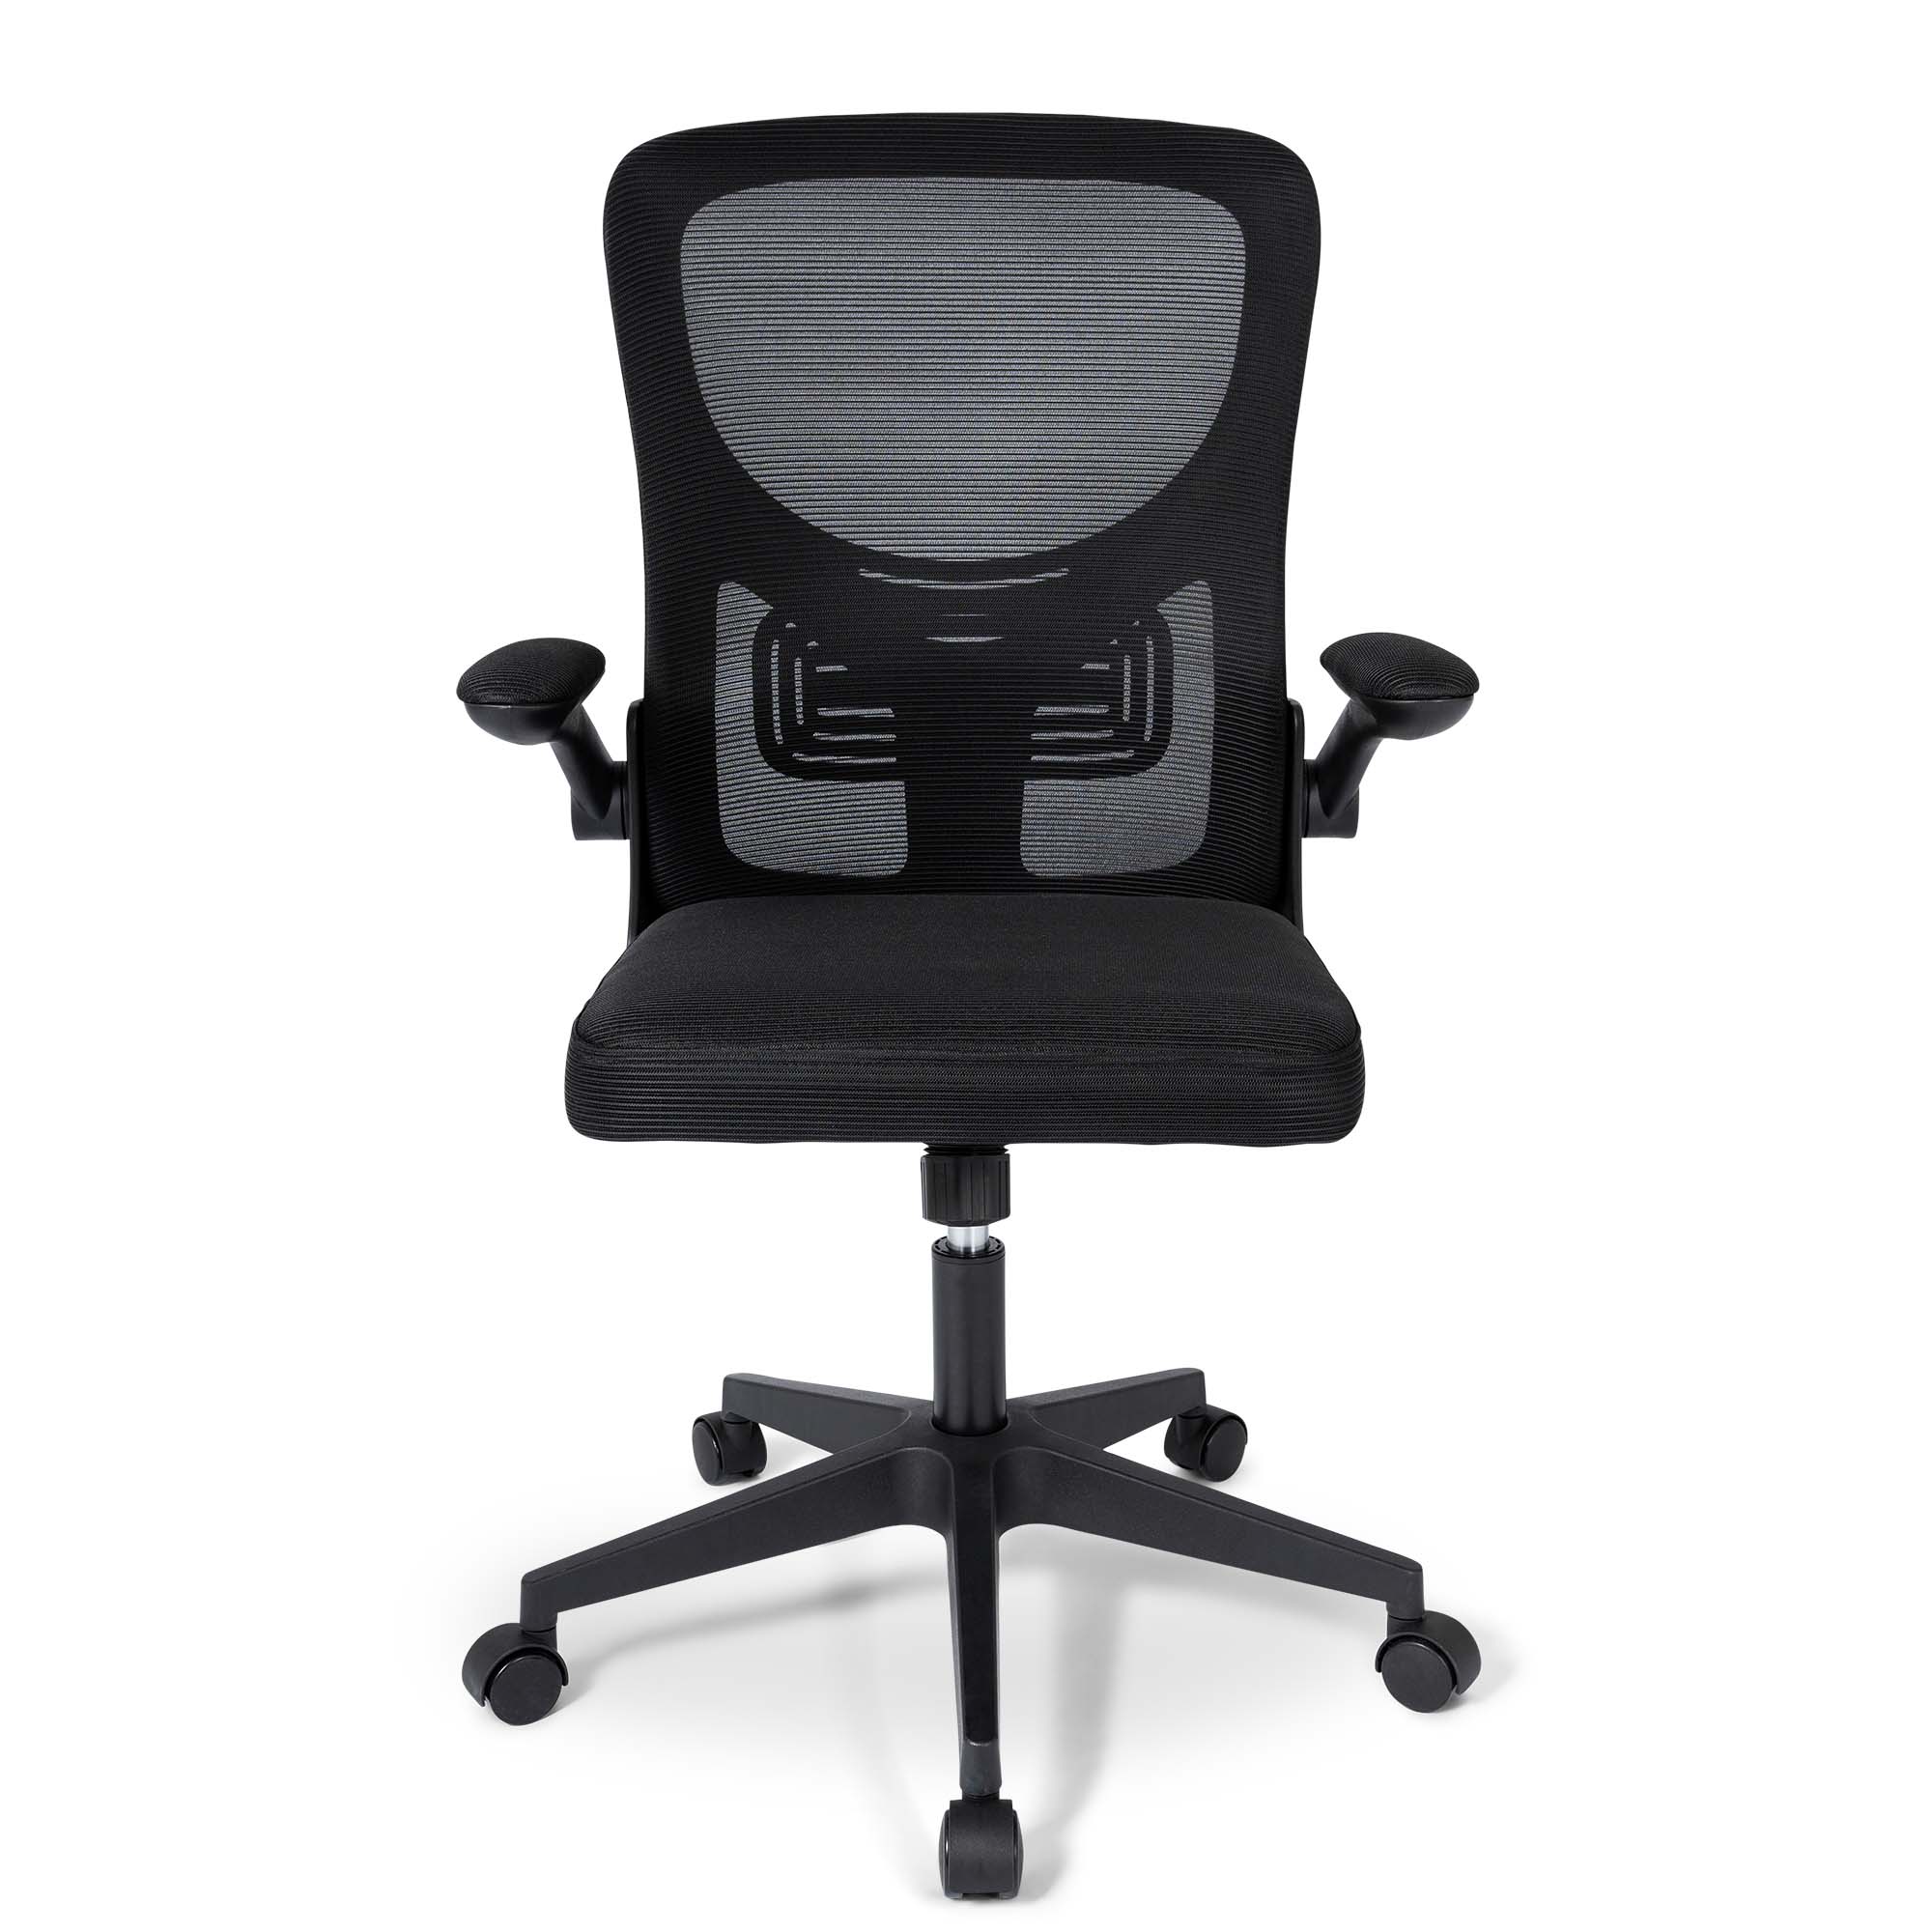 Ergodu Ergonomic Office Chair with Foldable Armrests front view